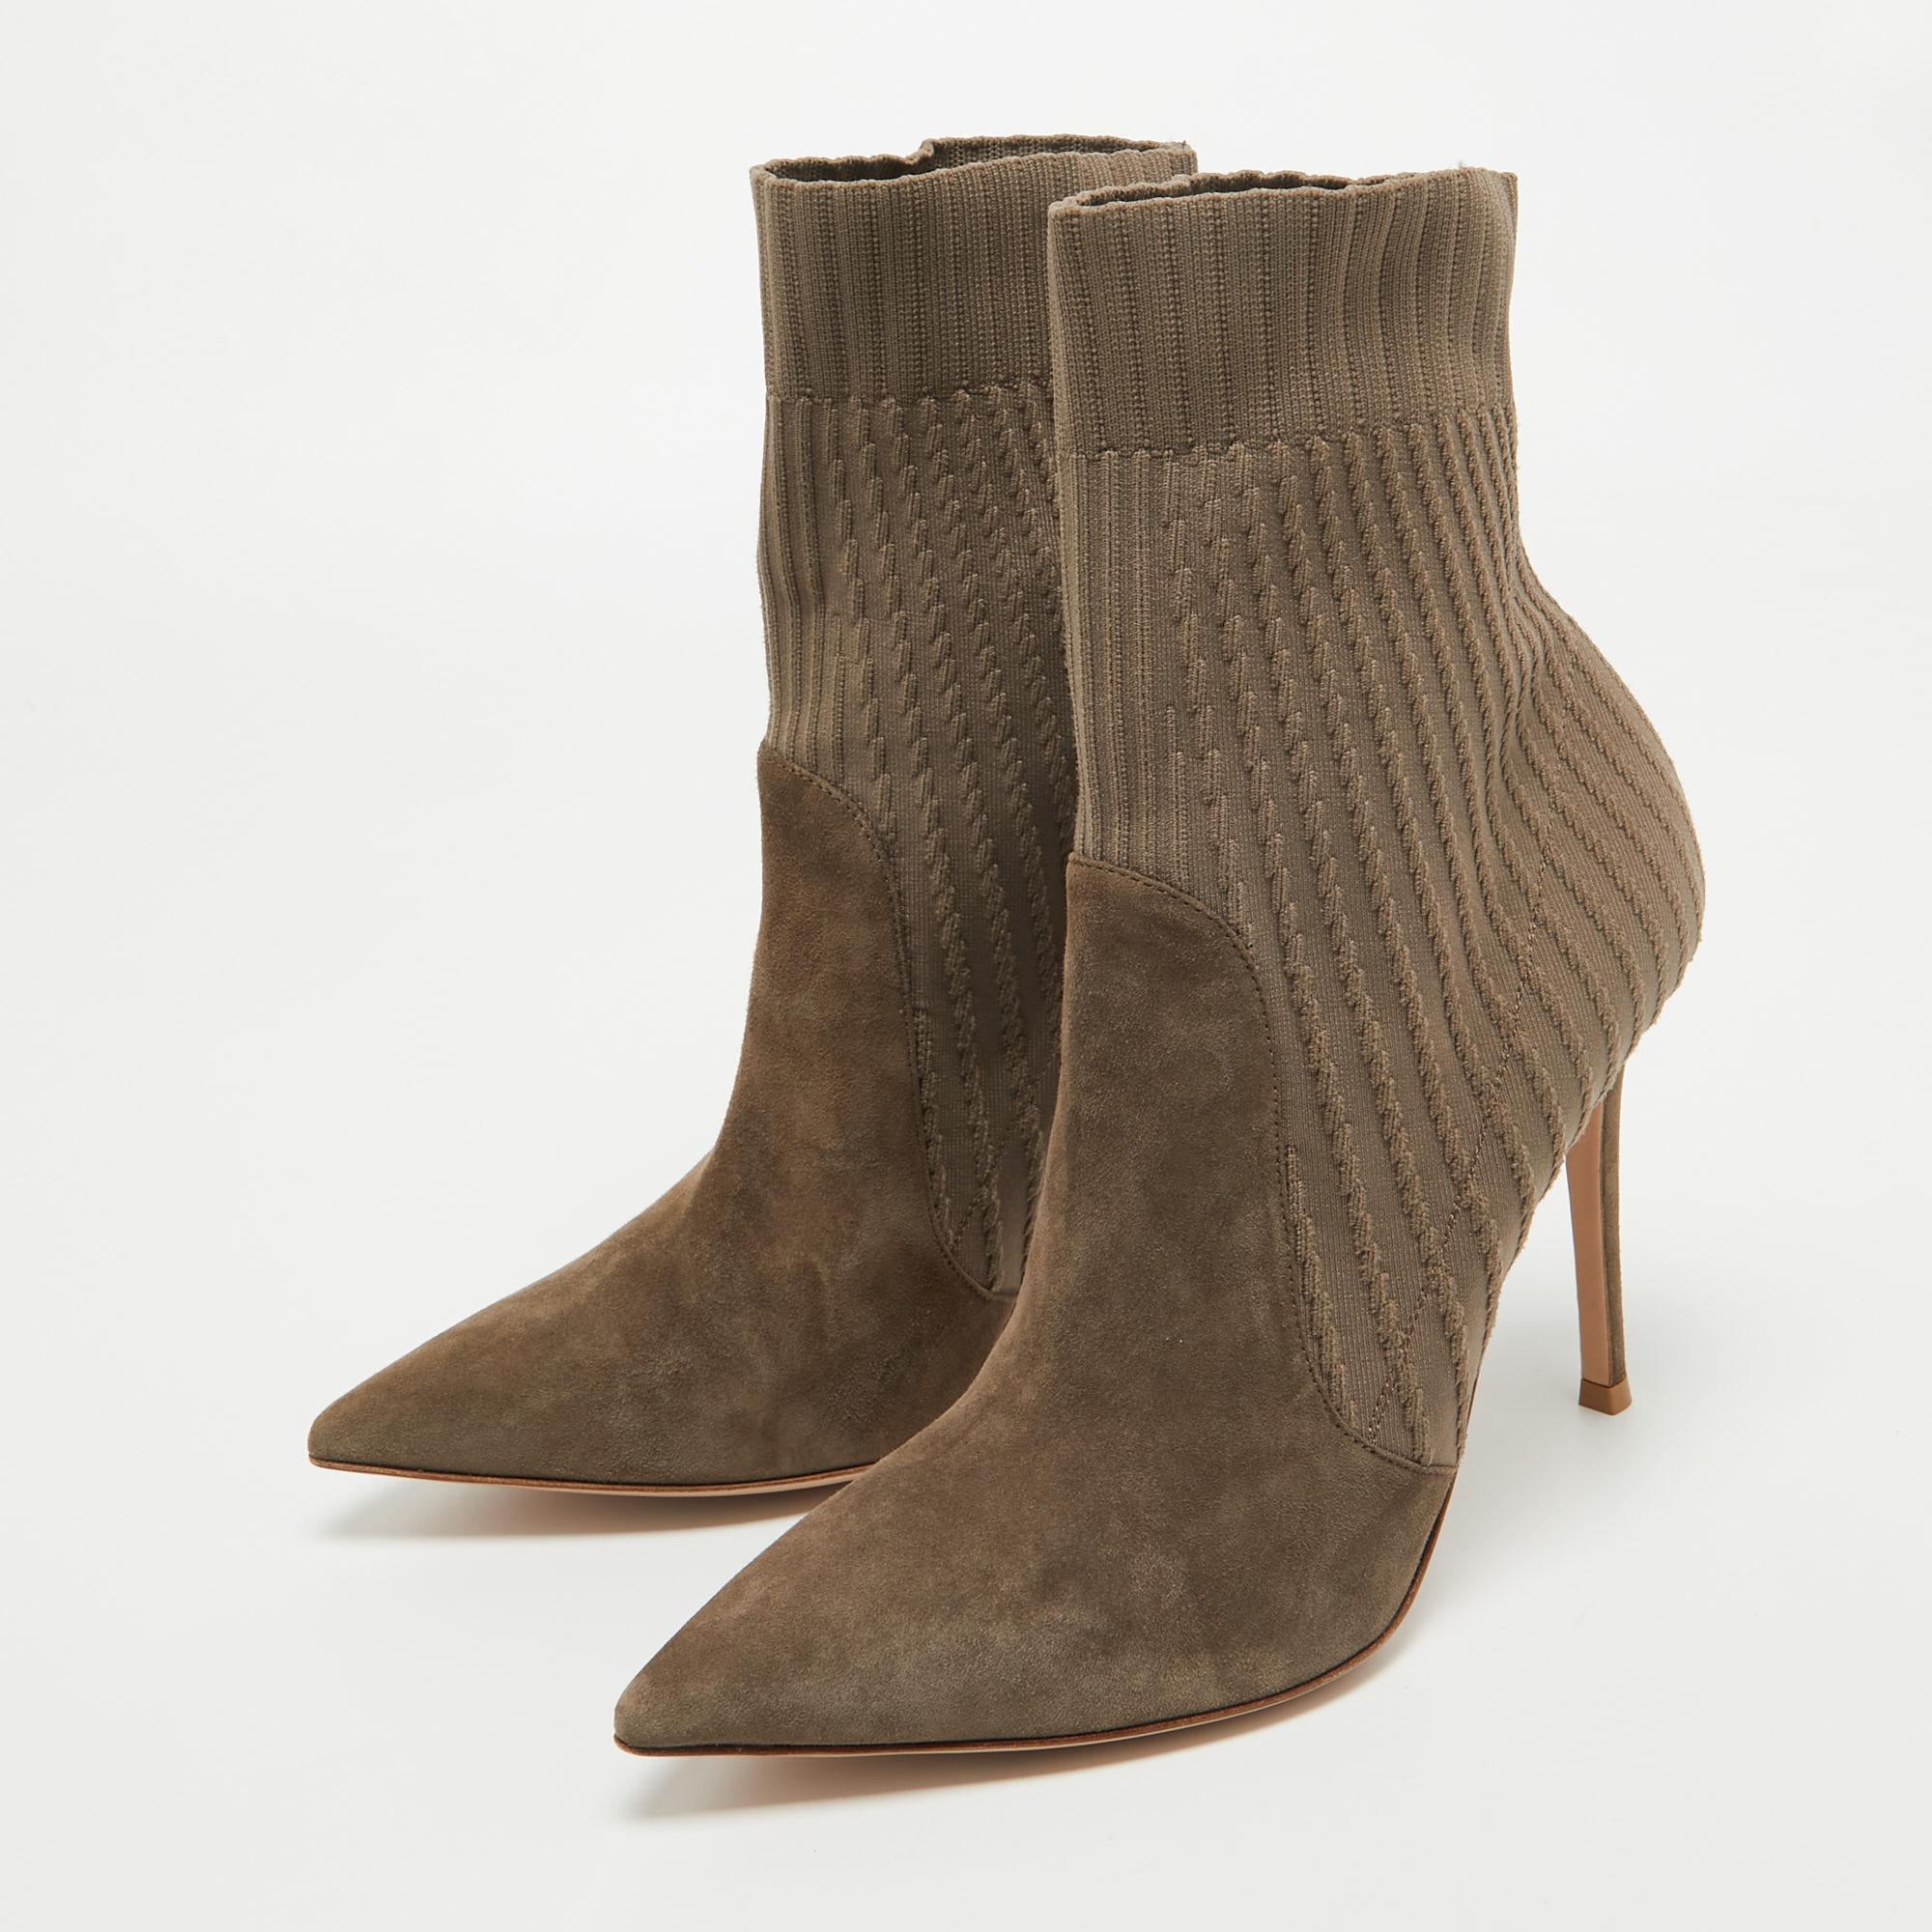 Give your outfit a luxe update with this pair of designer ankle boots. The shoes are sewn perfectly to help you make a statement in them for a long time.

